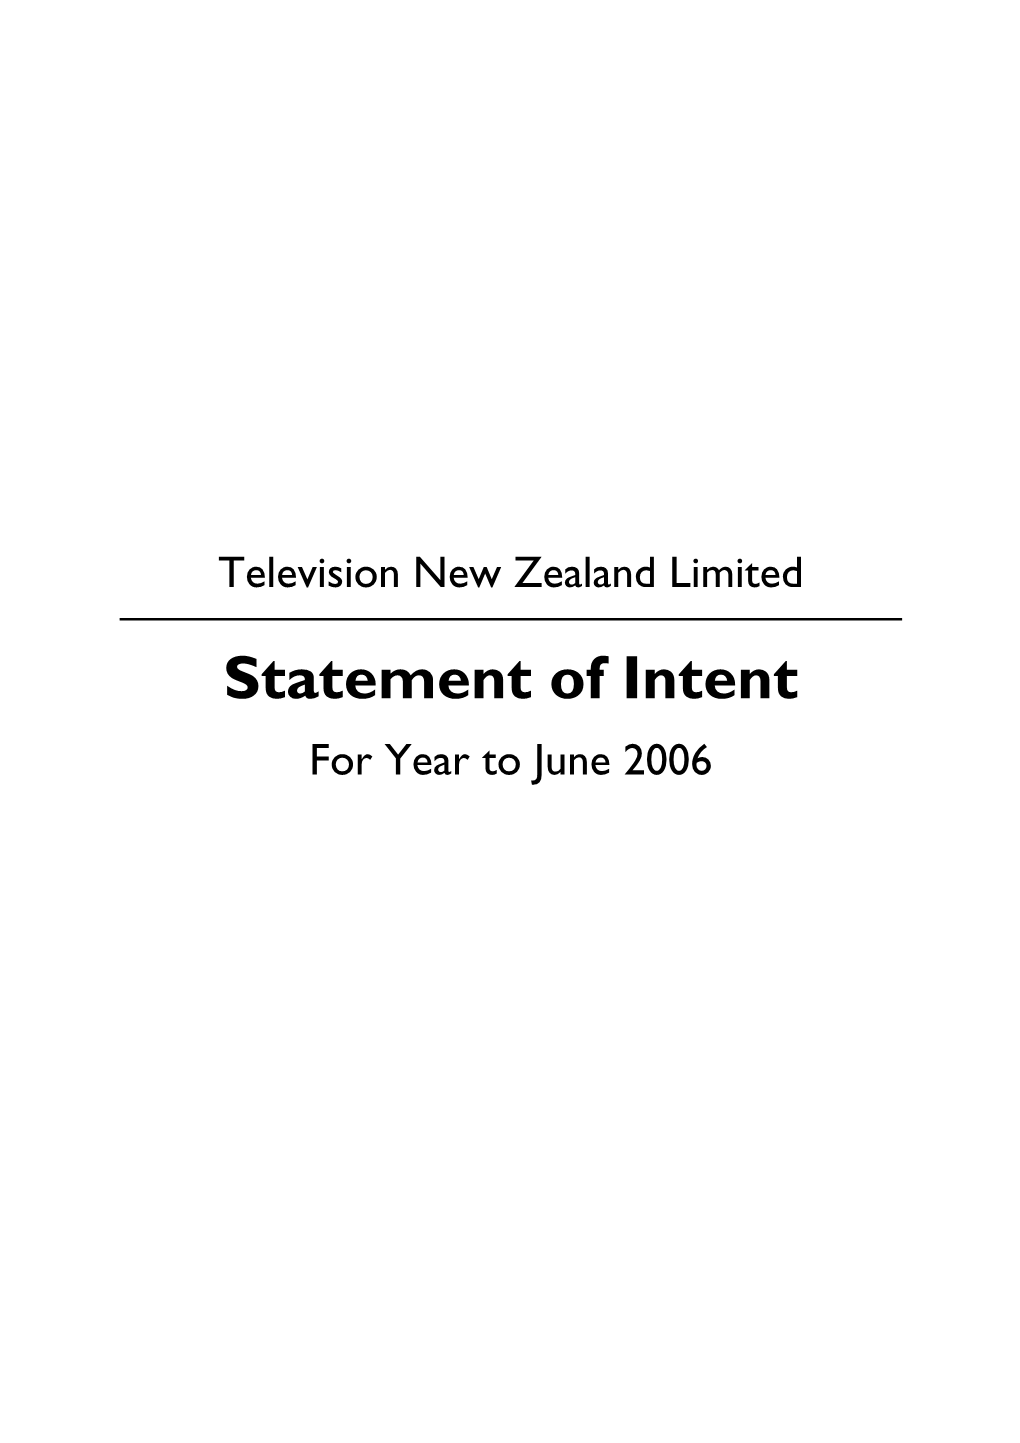 Television New Zealand Limited Statement of Intent for Year to June 2006 Television New Zealand Limited Statement of Intent for the Year Ended 30 June 2006